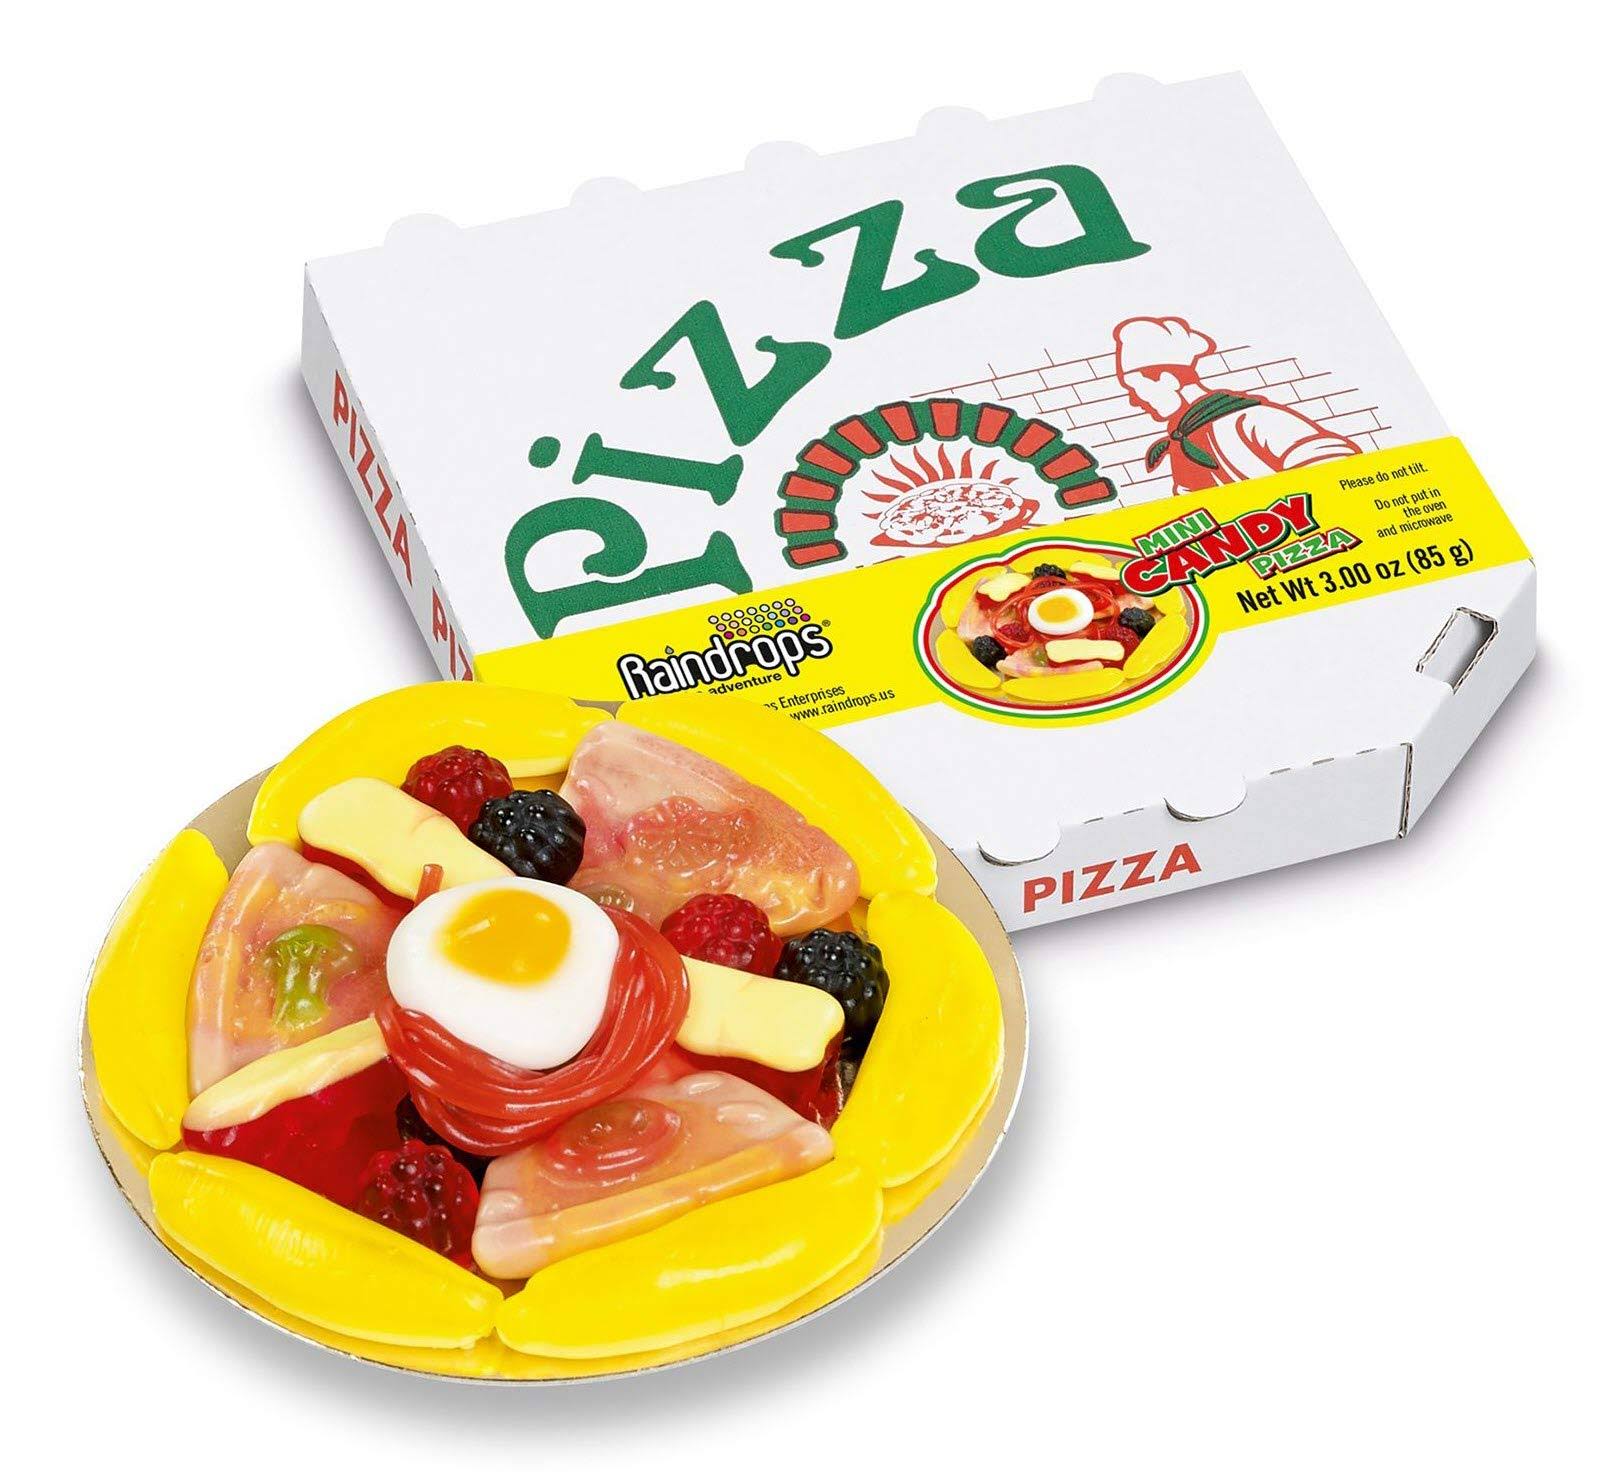 Raindrops Gummy Candy Pizza - 4.5 Mini Pizza with 18 Pieces of Candy P